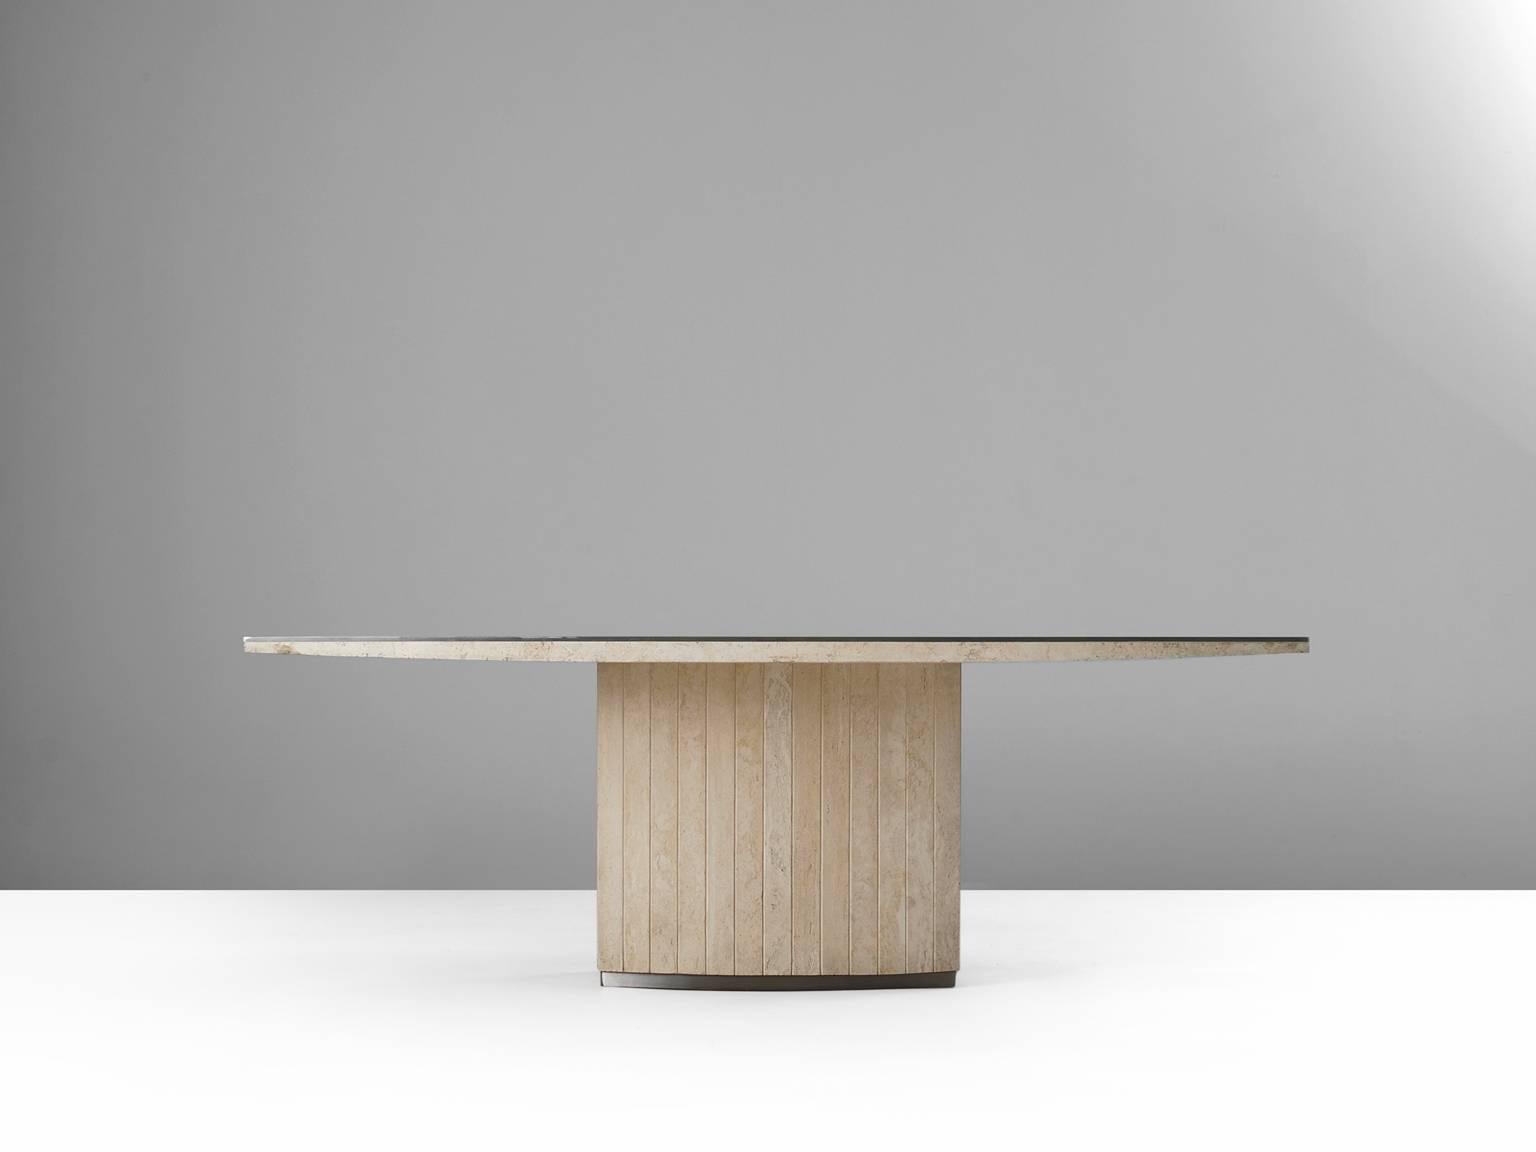 Dining table, in travertine and steel, by Willy Rizzo, Italiy 1970s. 

Dining table, solid travertine top with steel edges. Fluting pedestal base. 
Stately and modern design. Also seen in the combination of materials: luxurieus travertine and modern